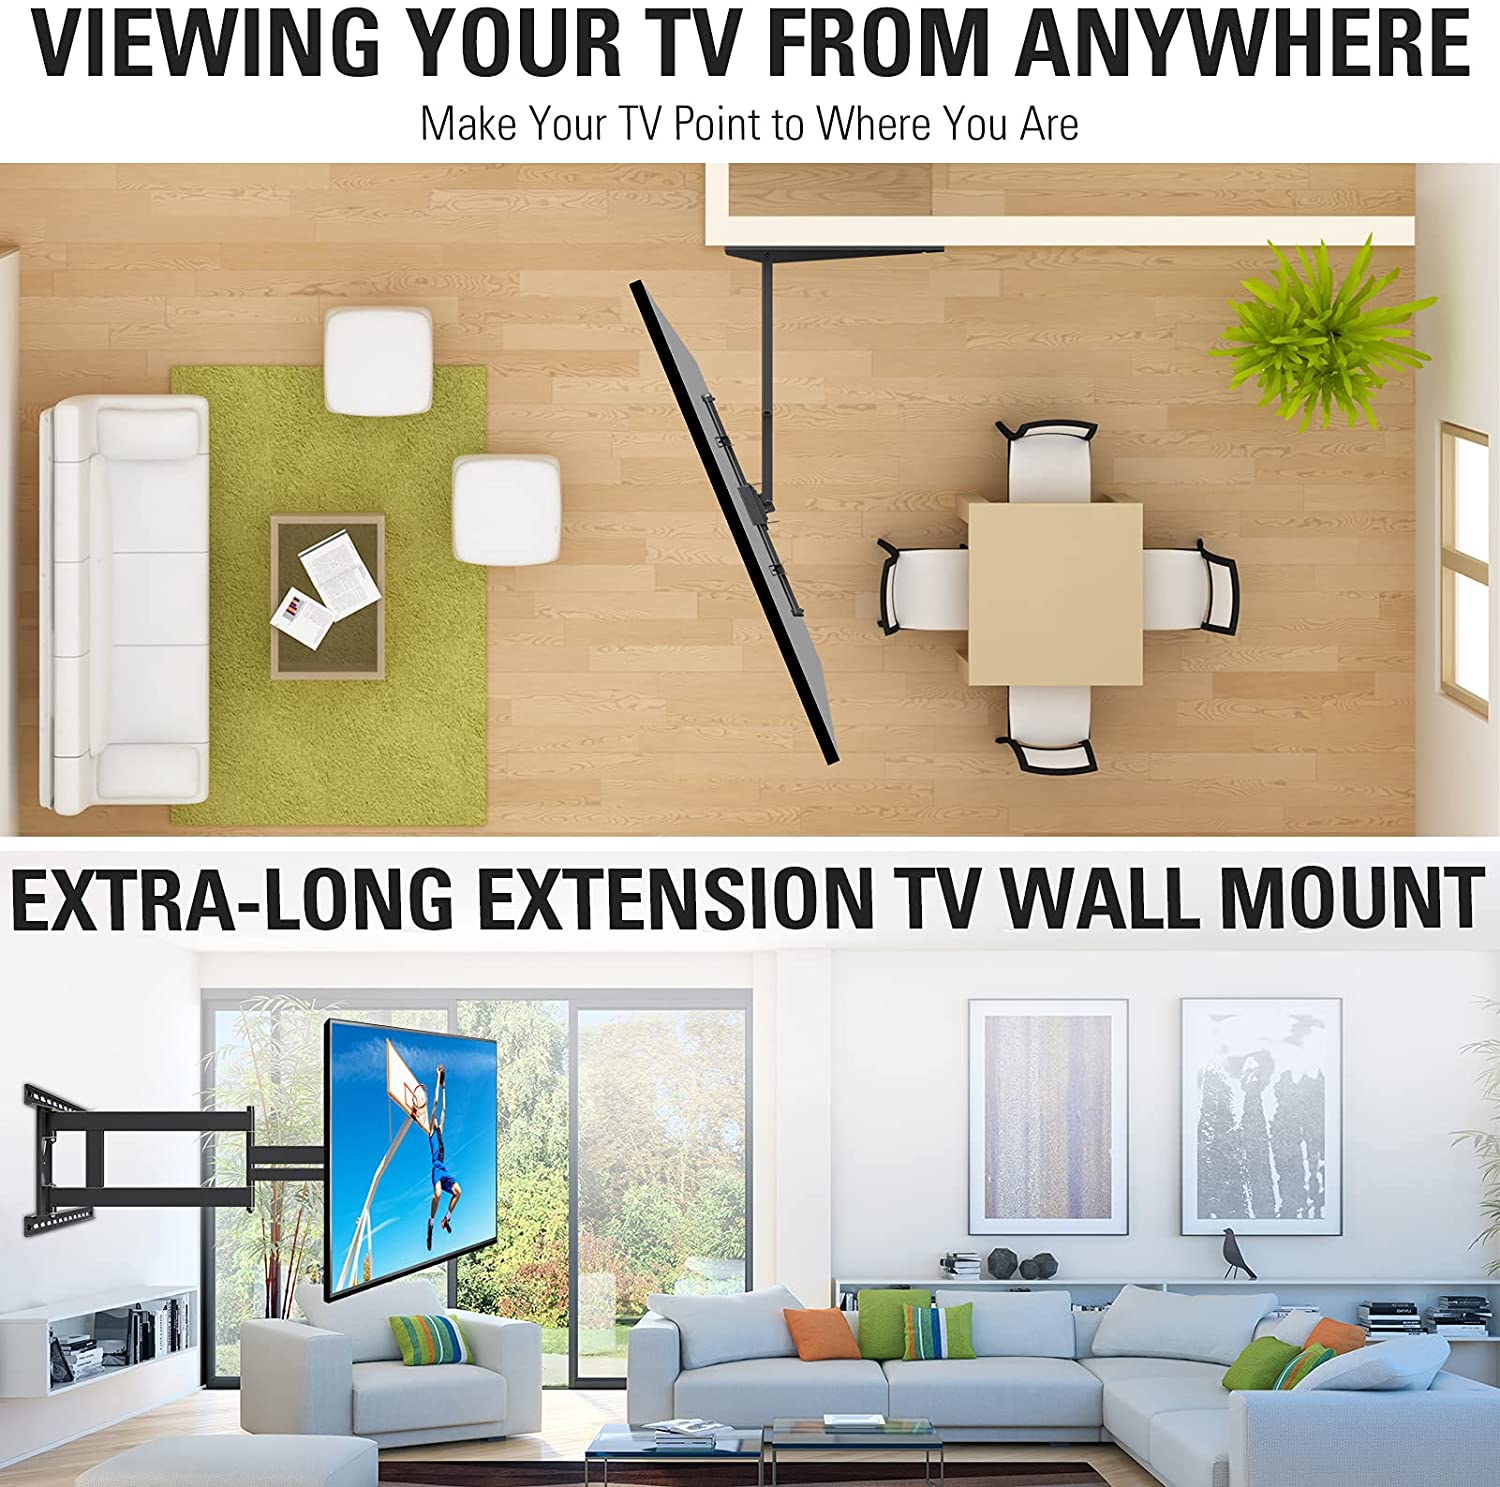 extending TV mount is perfect for corner mounting 